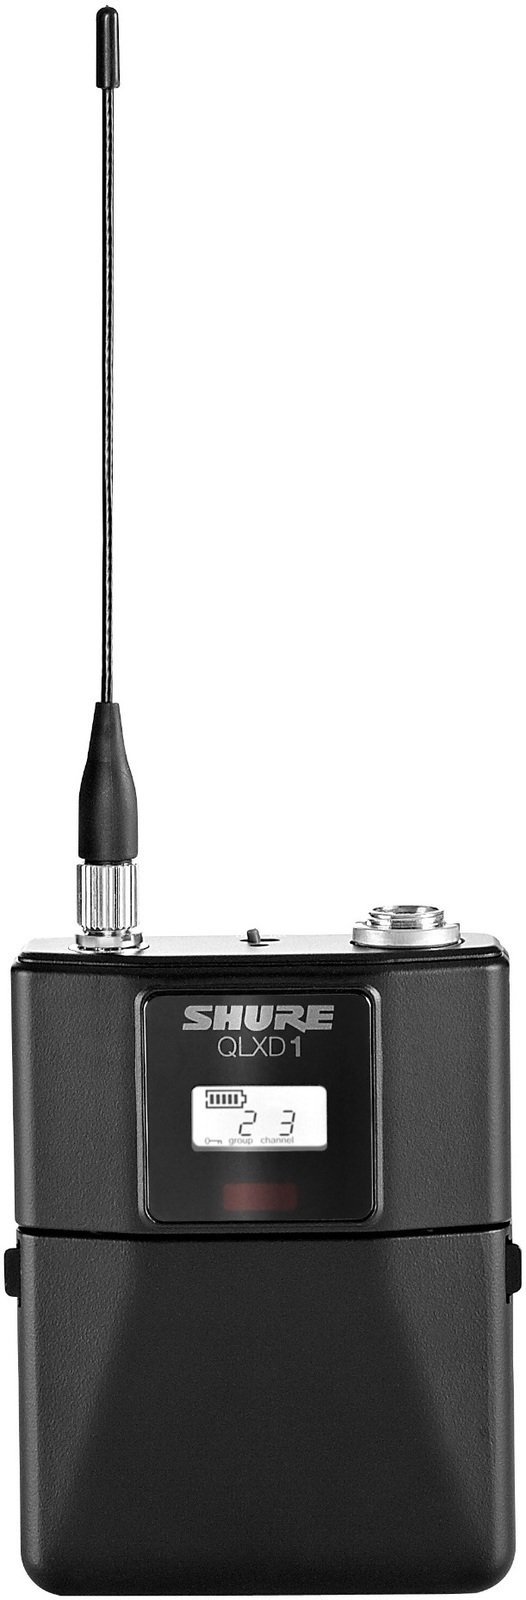 Transmitter for wireless systems Shure QLXD1 G51: 470-534 MHz